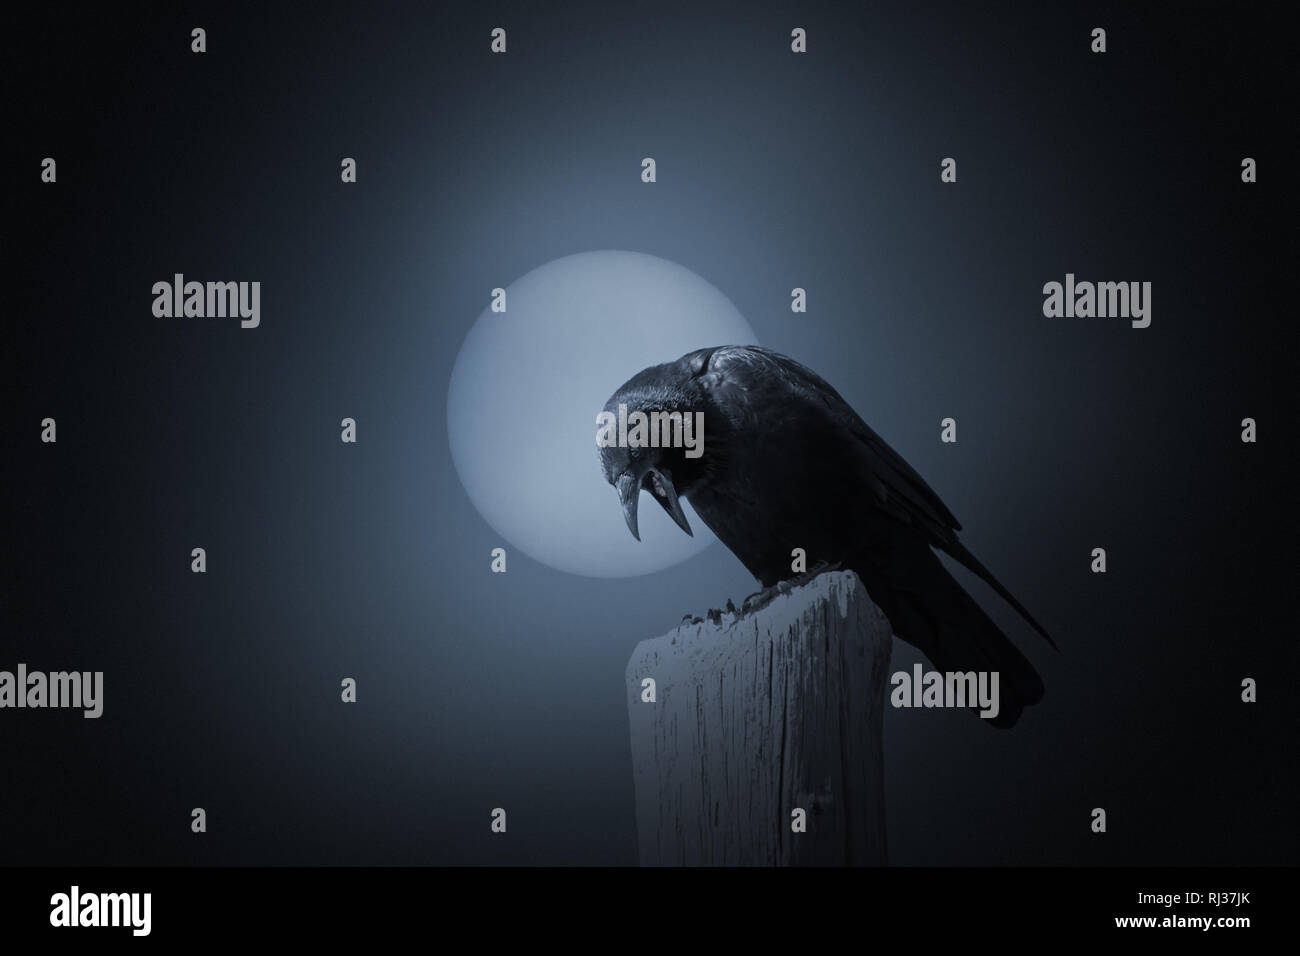 Full moon in an overcast night with crow. Added some digital grain in the background. Stock Photo